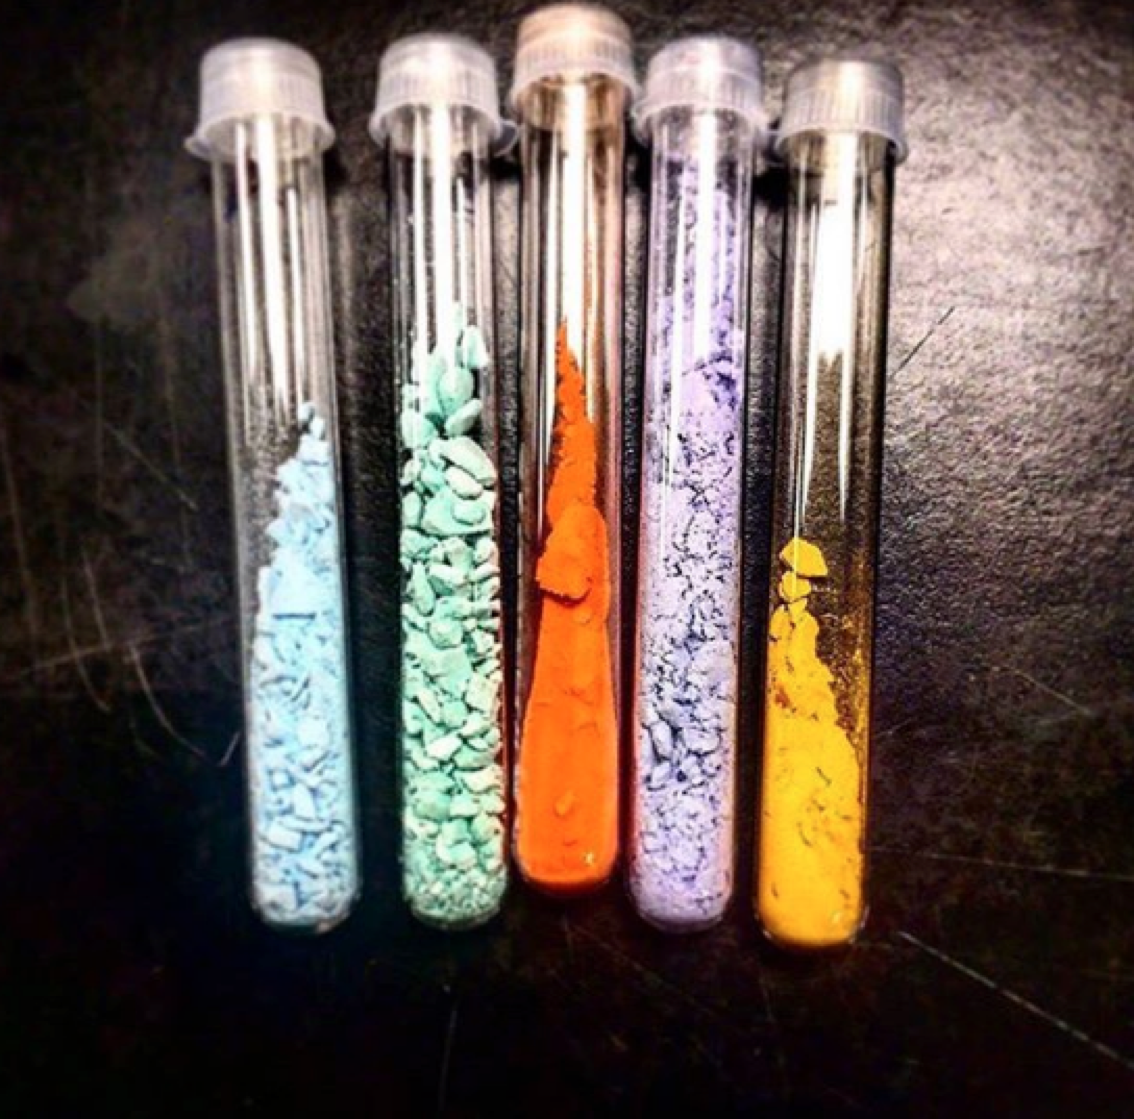 It's a #chemistry rainbow! Thank you to #澳门二四六天天彩O Student @thaileur for the photo.